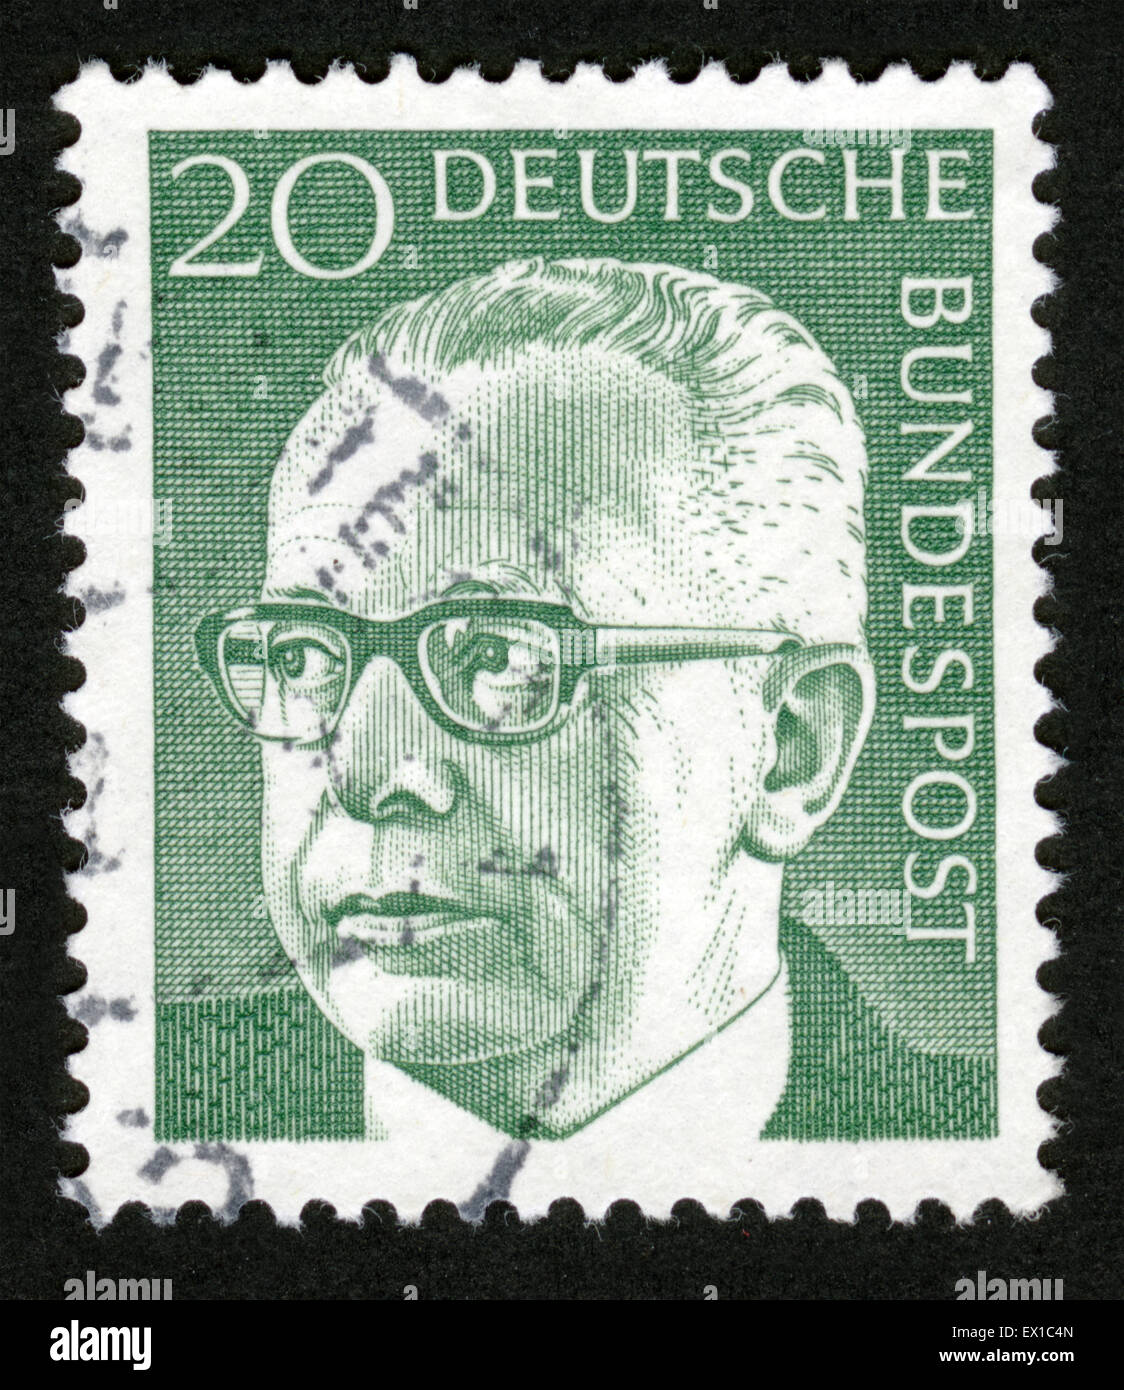 GERMANY - CIRCA 1971 A stamp printed in Germany showing a portrait of Federal President Gustav Walter Heinemann, circa 1971. Stock Photo